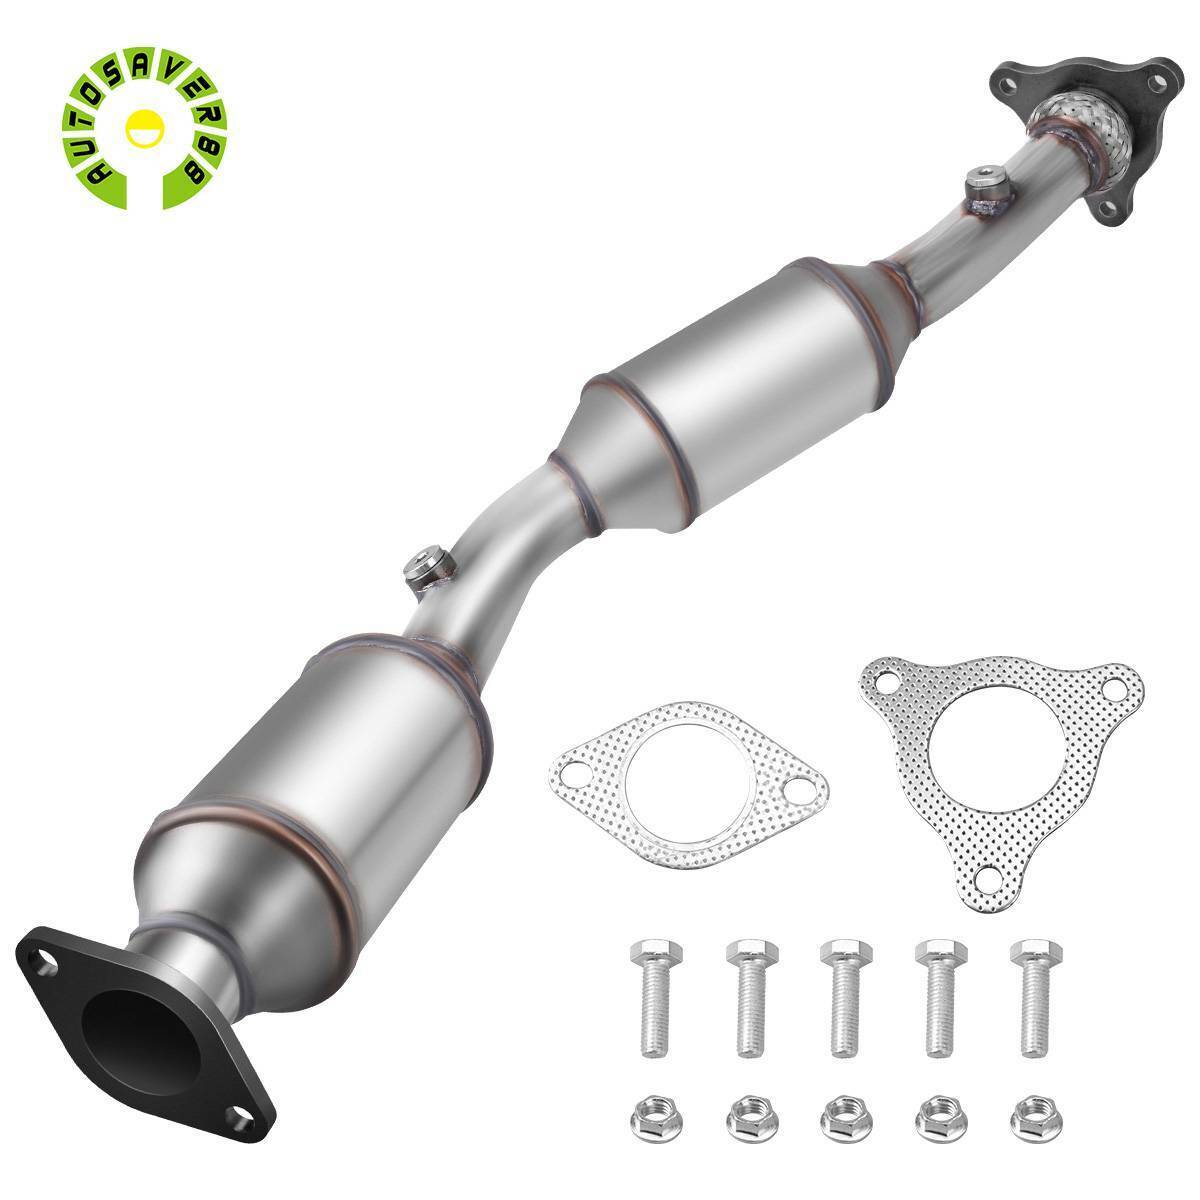 Direct-Fit Catalytic Converter for 2008 to 2010 Chevy Cobalt HHR Pontiac G5 2.2L